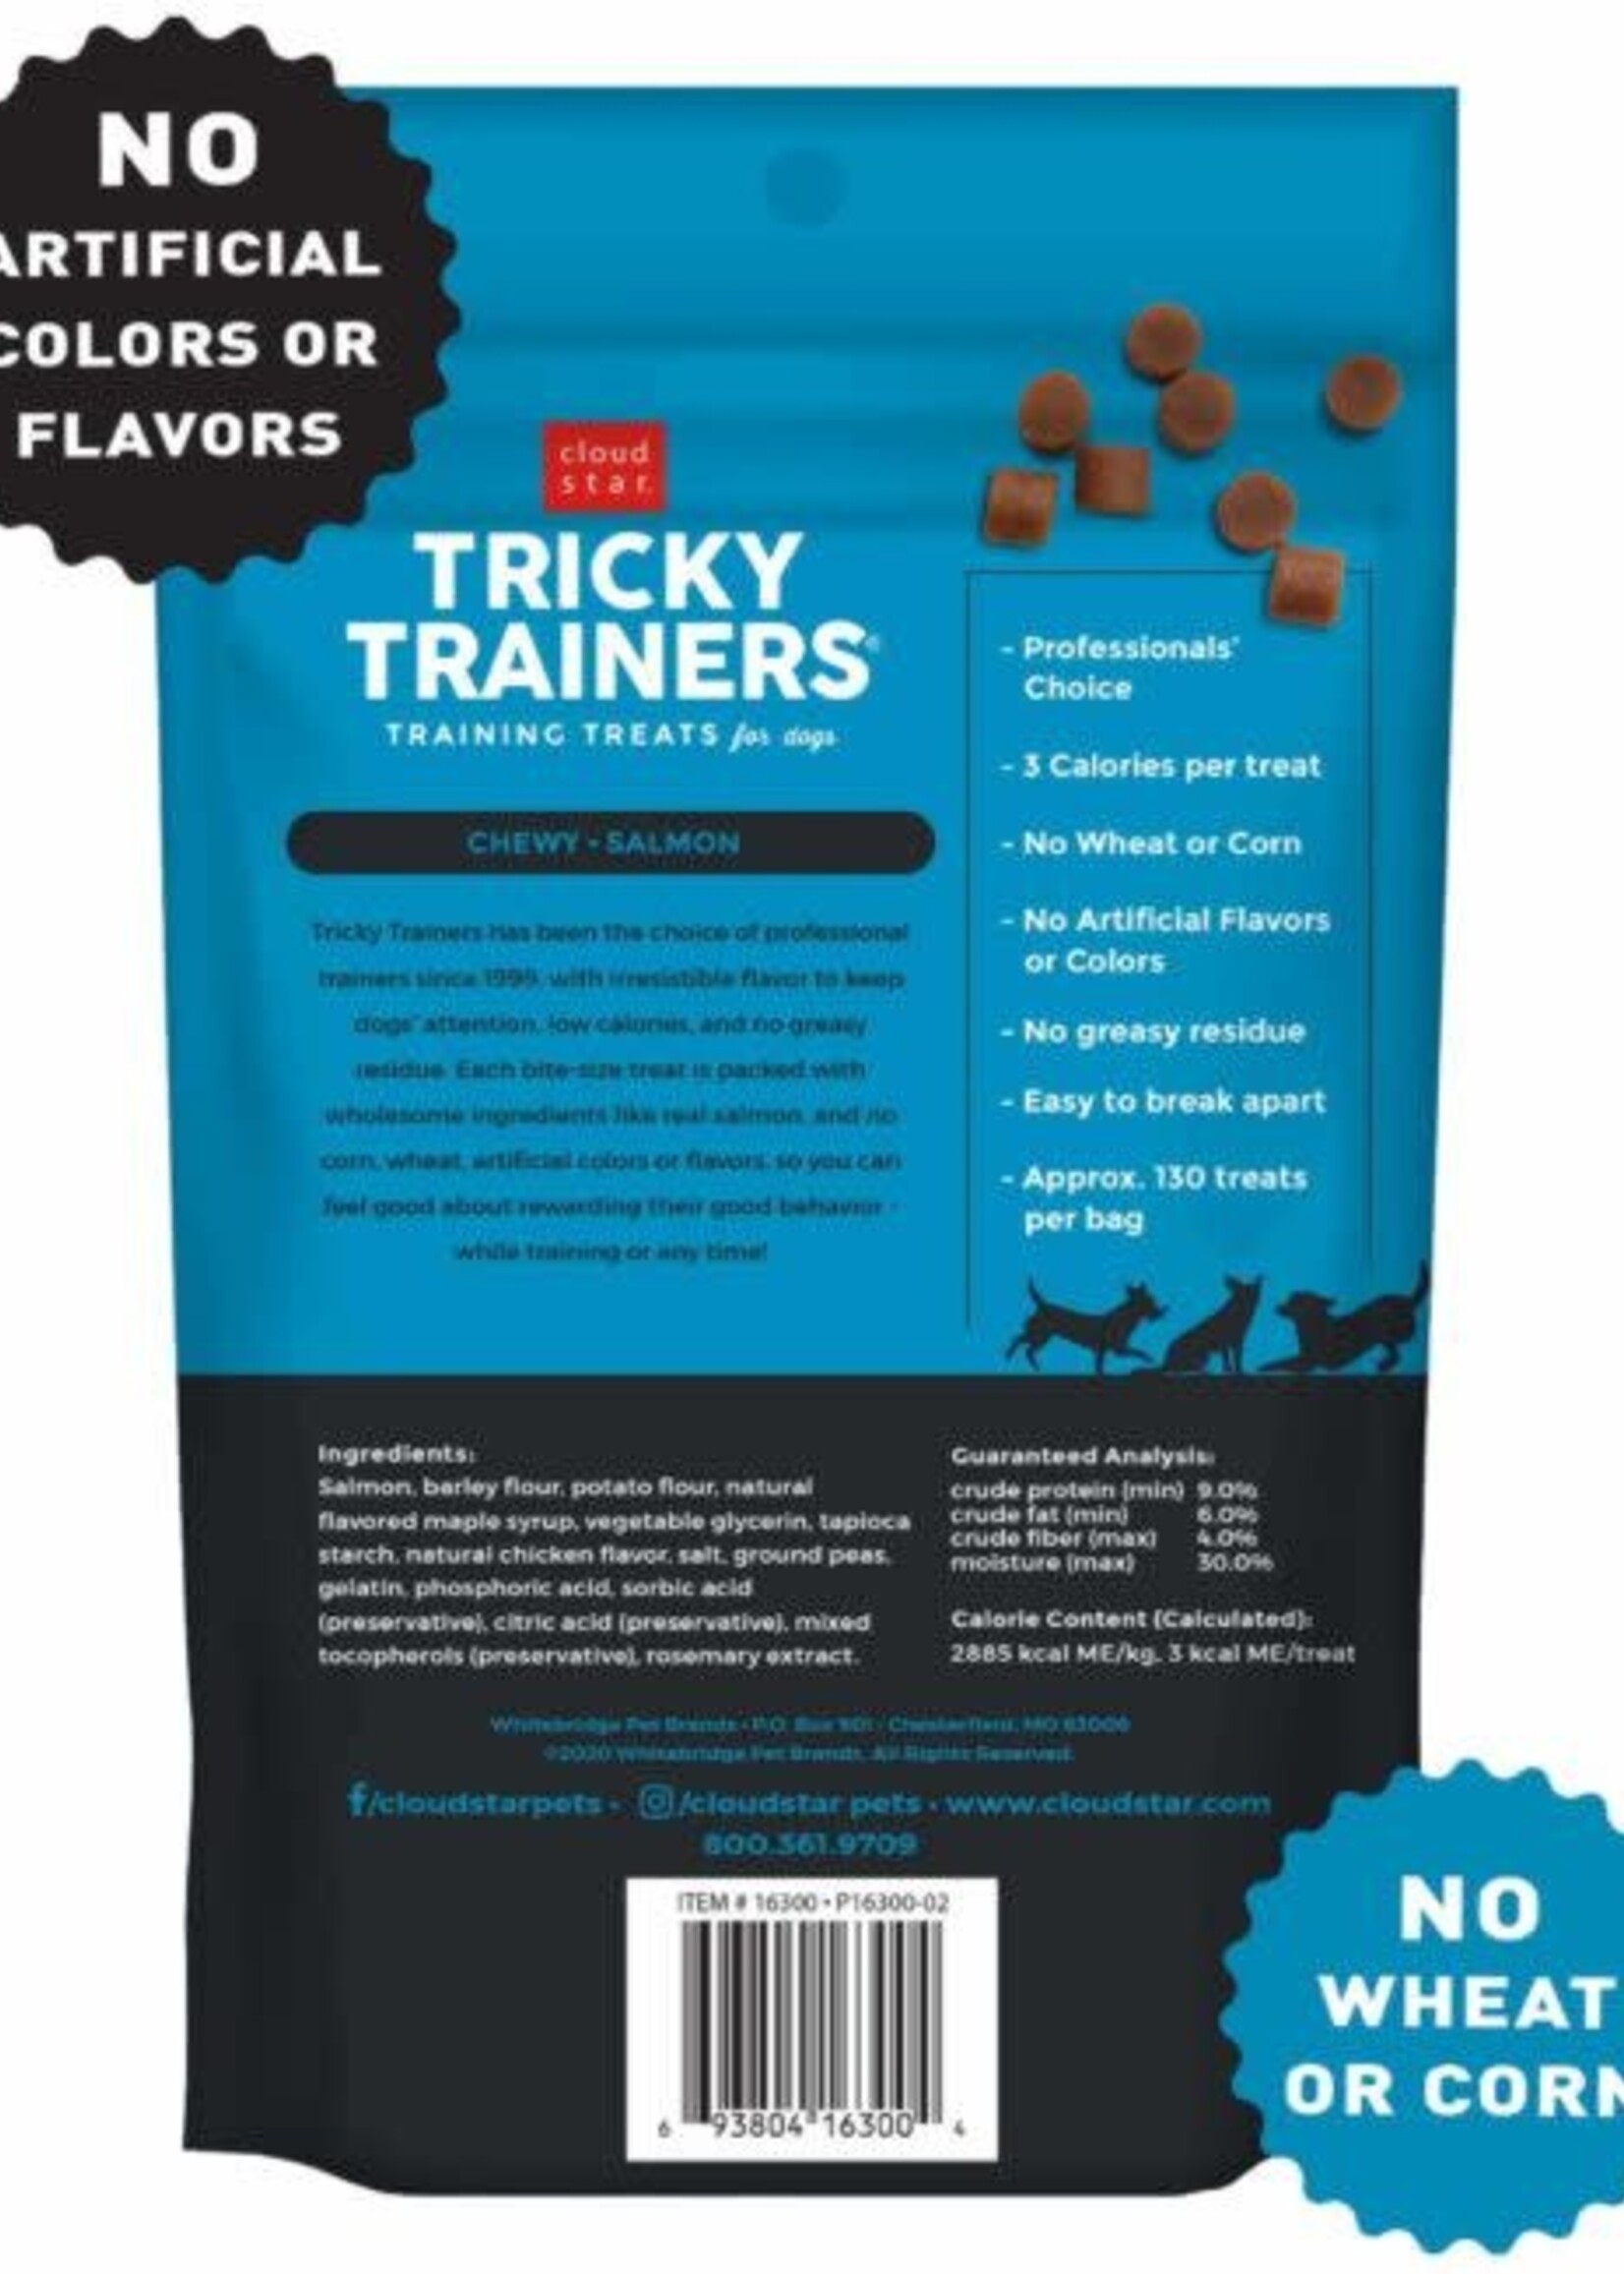 Cloud Star Cloud Star Tricky Trainers Soft & Chewy with Salmon Training Dog Treats 5-oz